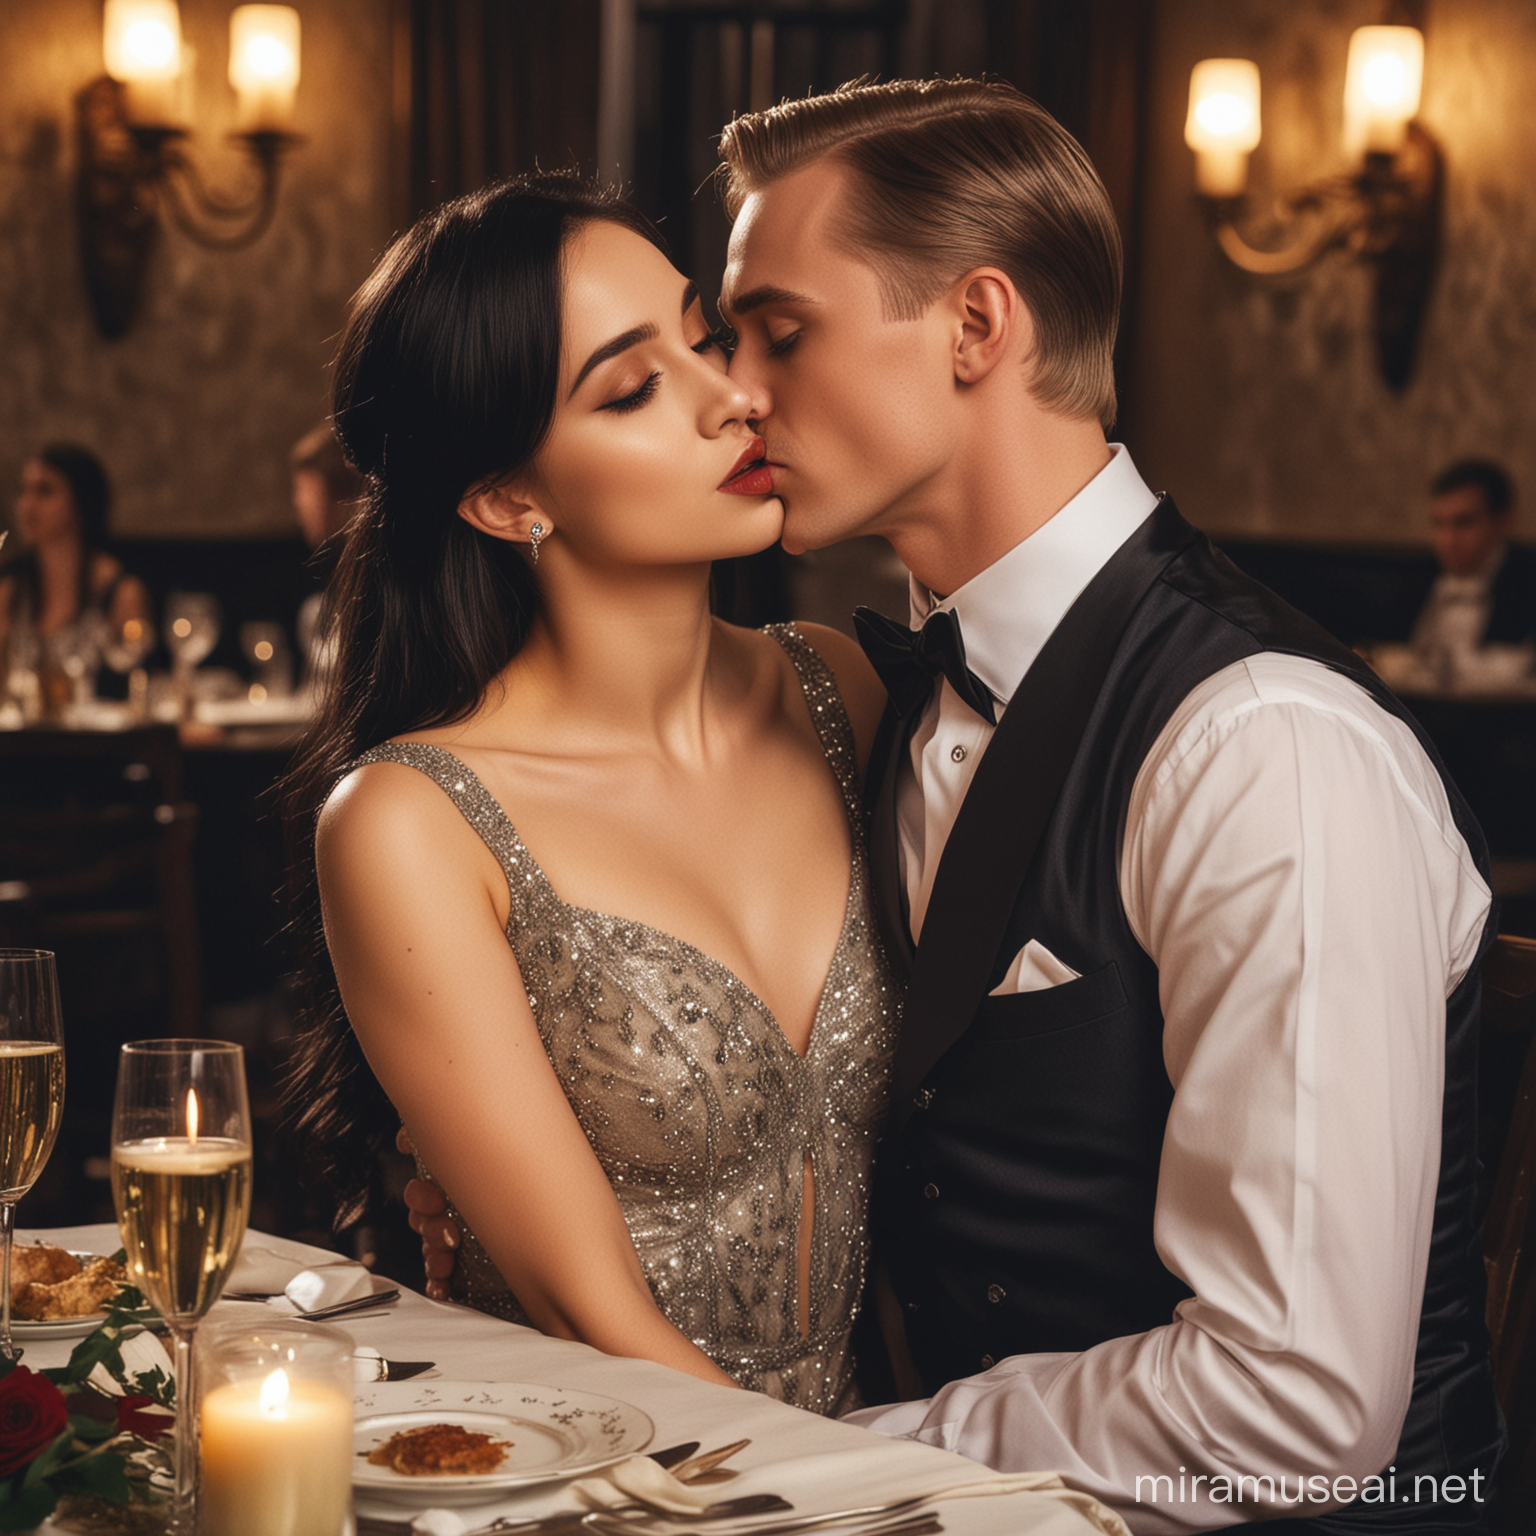 Elegant Evening Romance DarkHaired Beauty Kisses Draco Malfoy at Luxurious Dinner Table